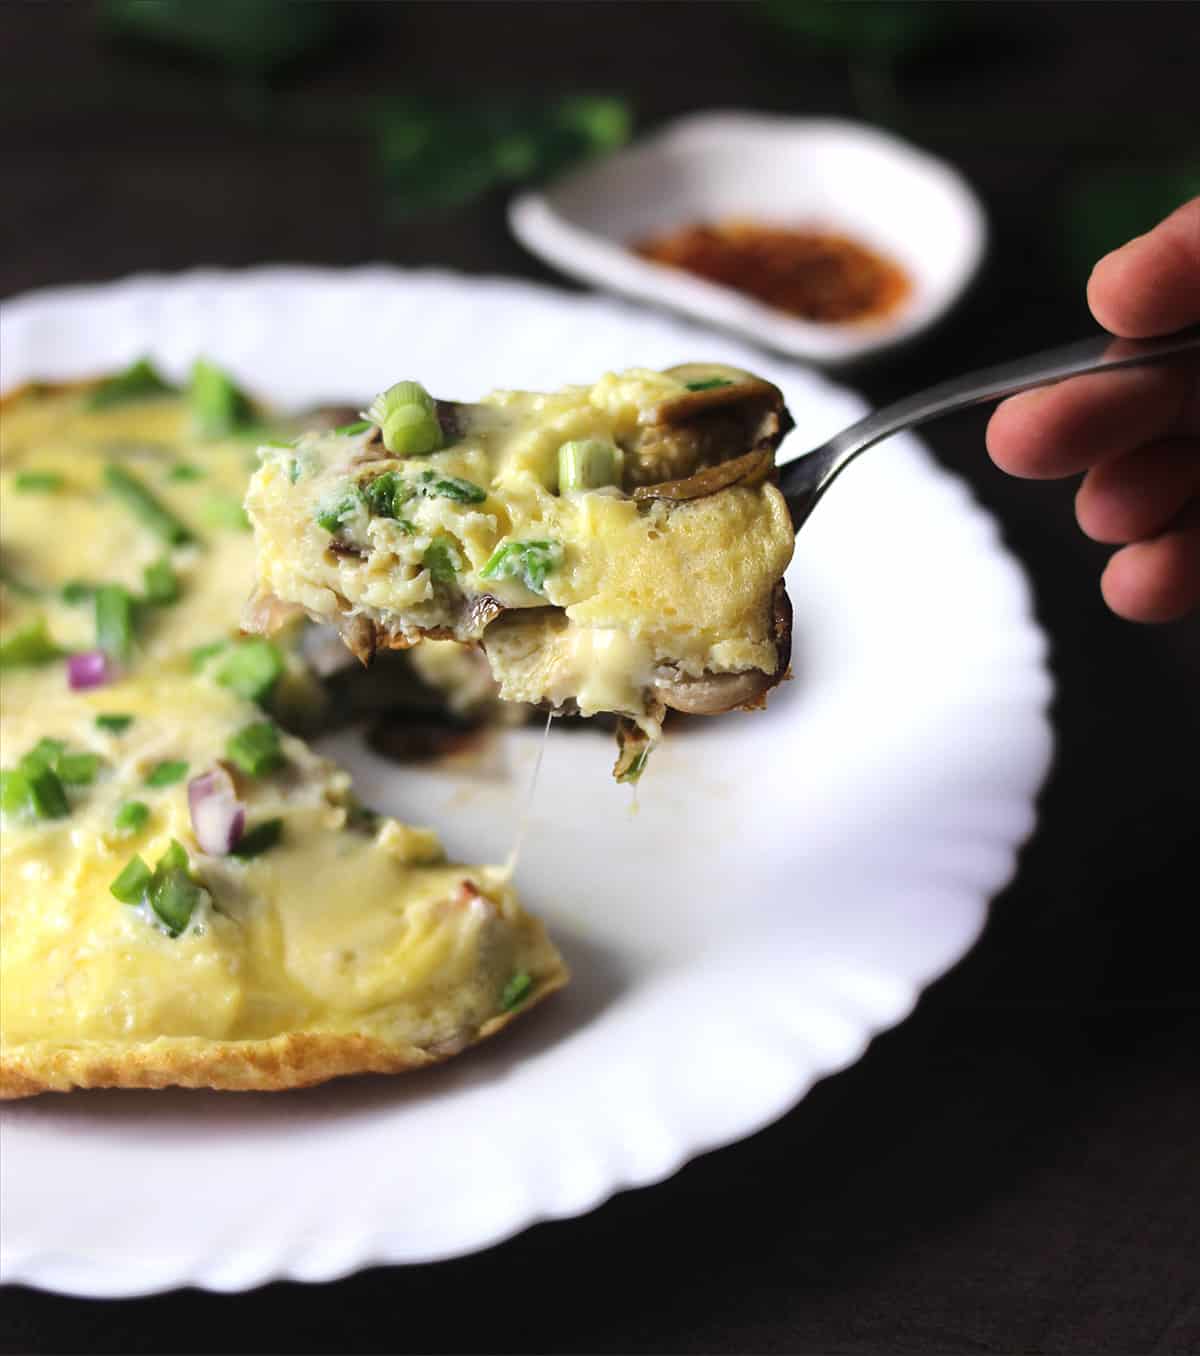 Holding keto cheese omelette (omlet) in a fork - best for weight loss, keto breakfast idea. 